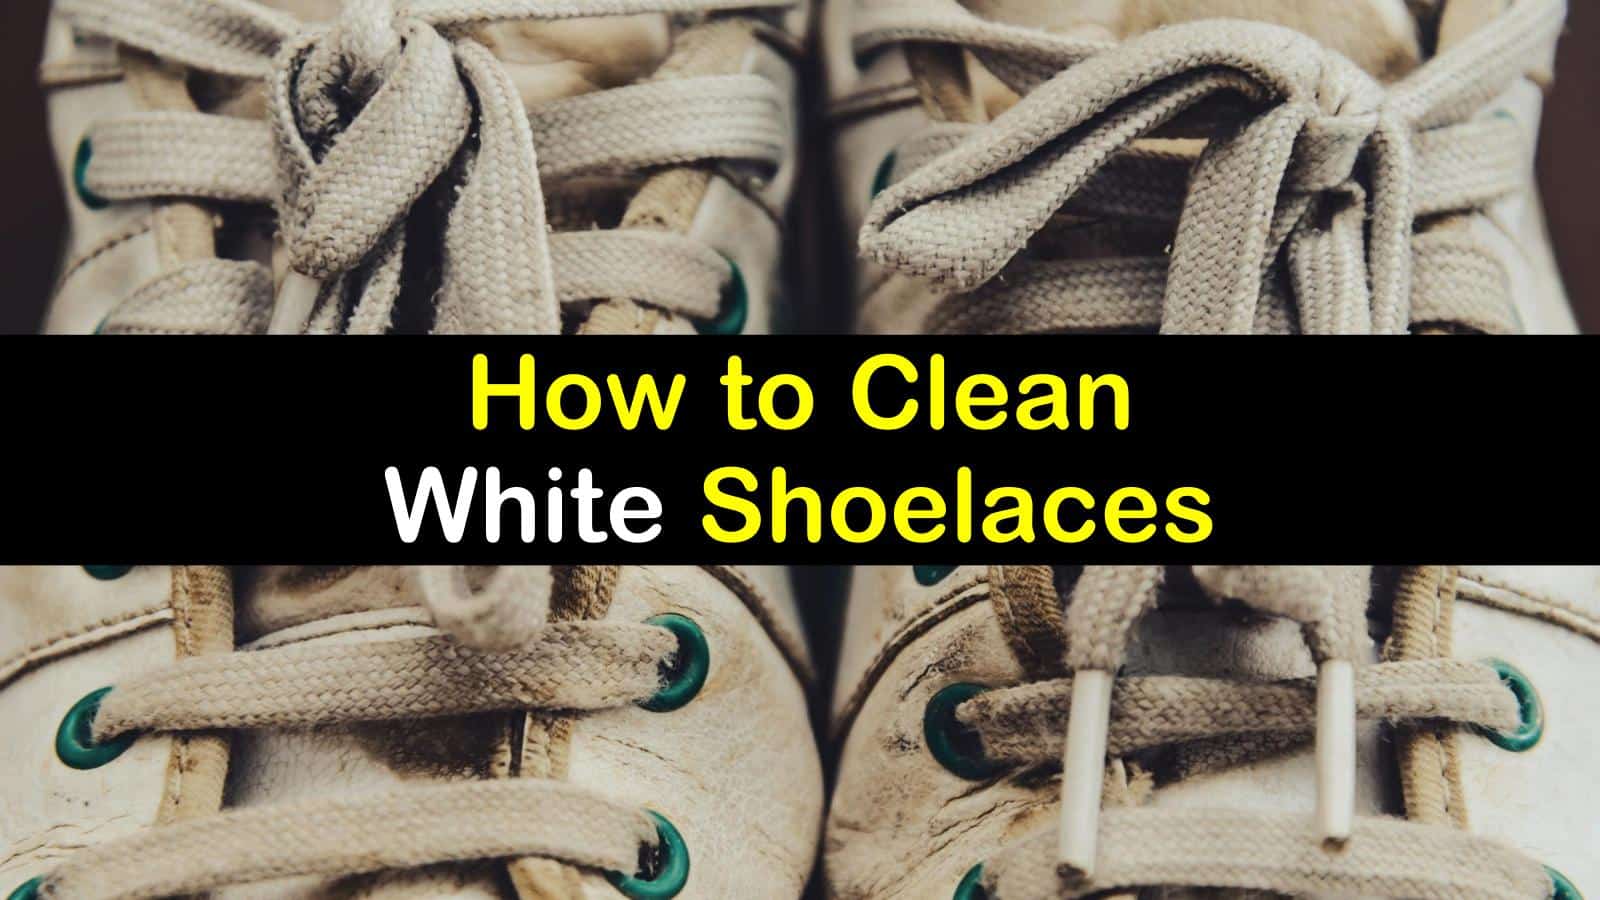 How To Clean White Shoelaces Fast inspire ideas 2022